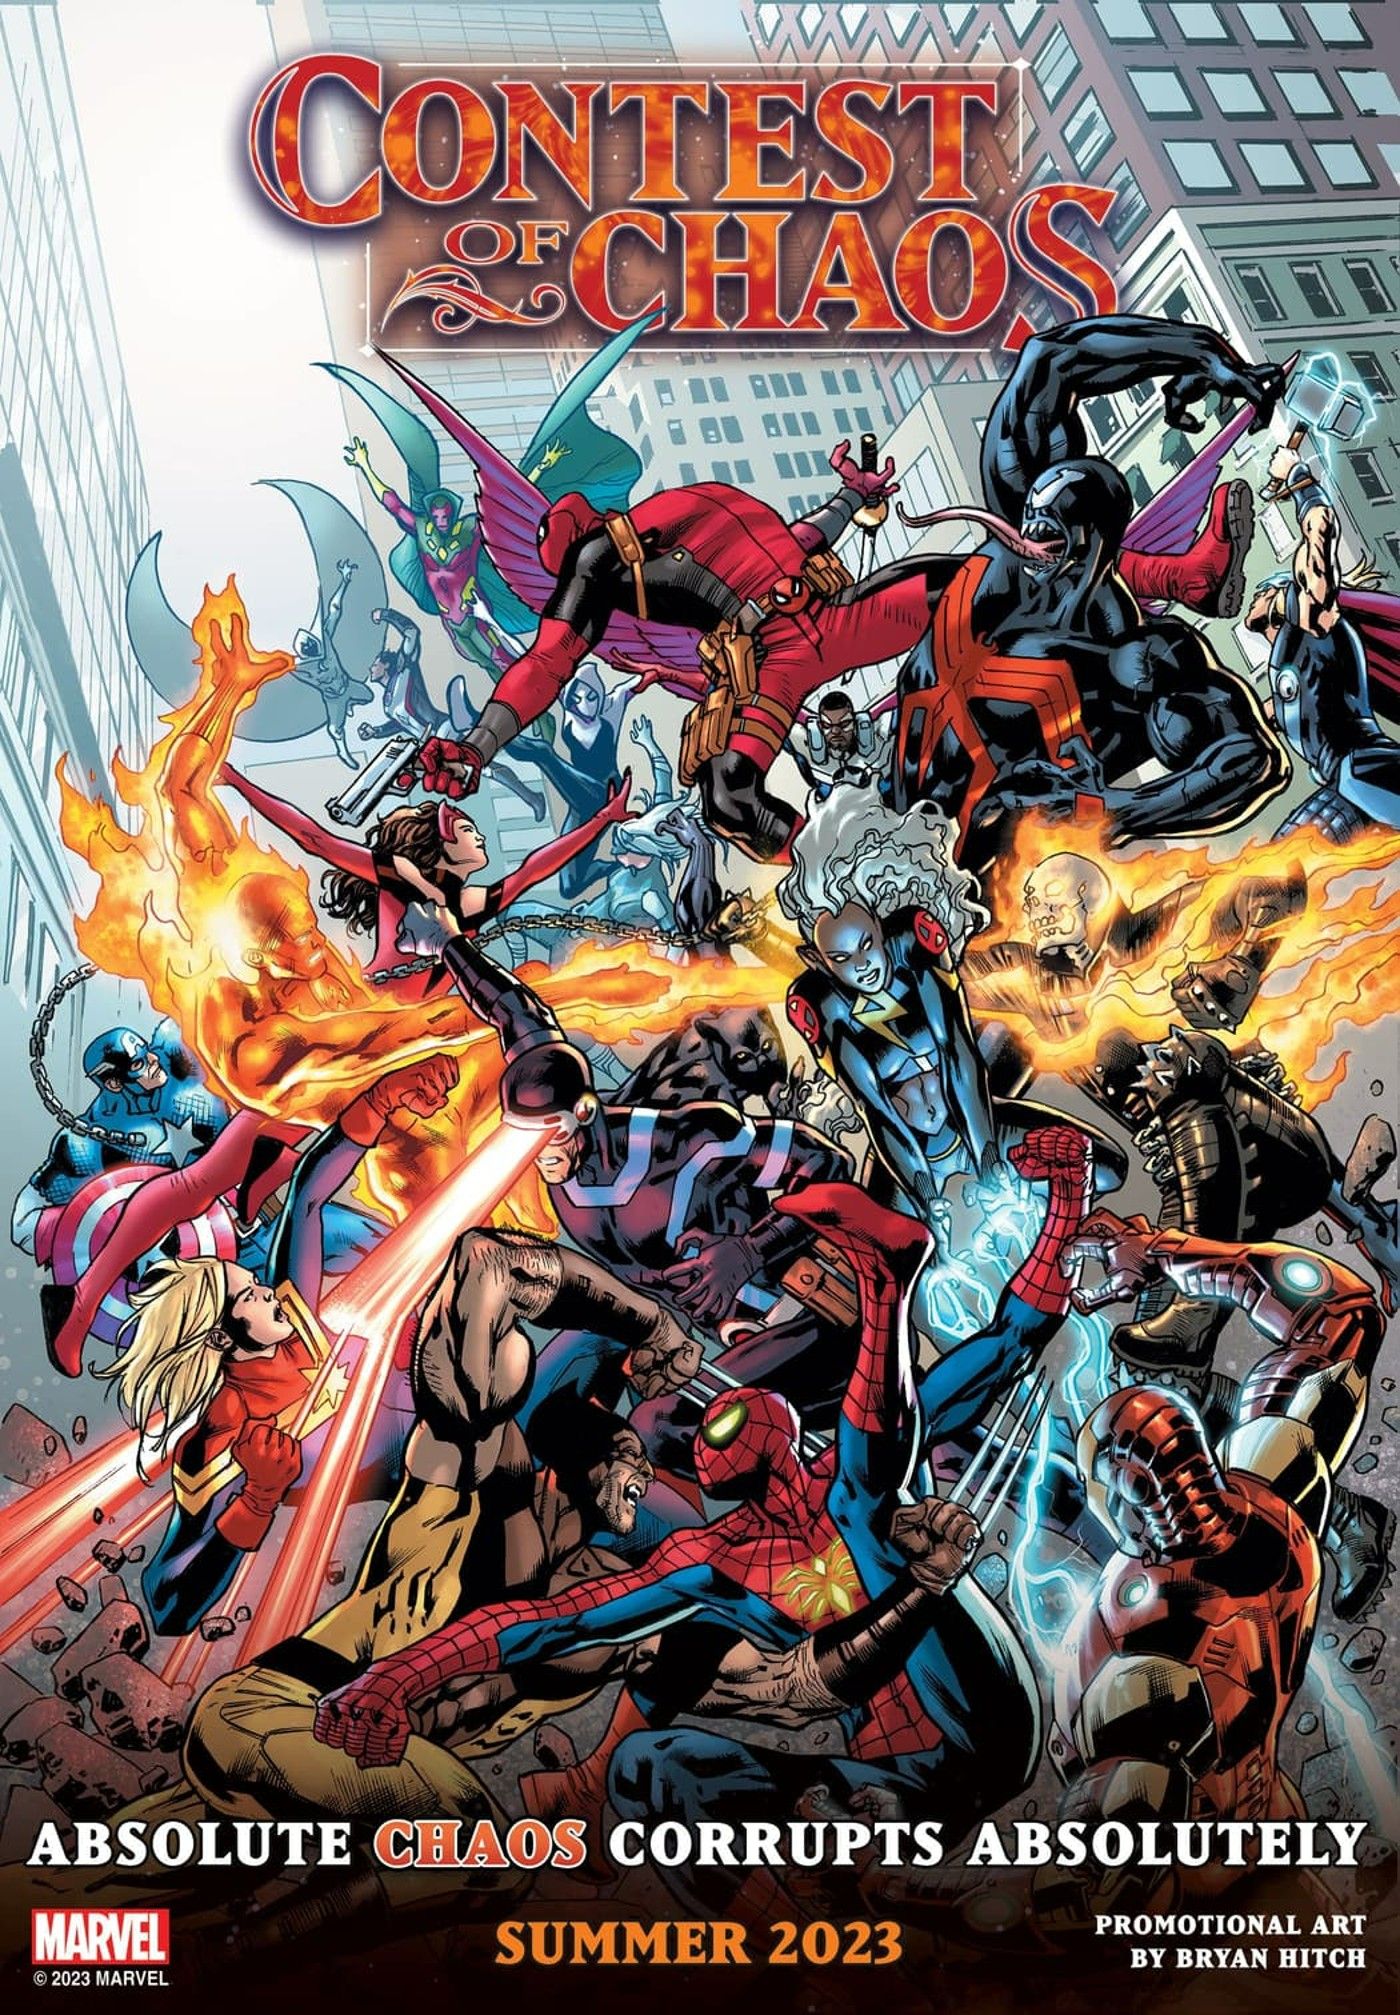 Contest of Chaos Marvel Promotional Art